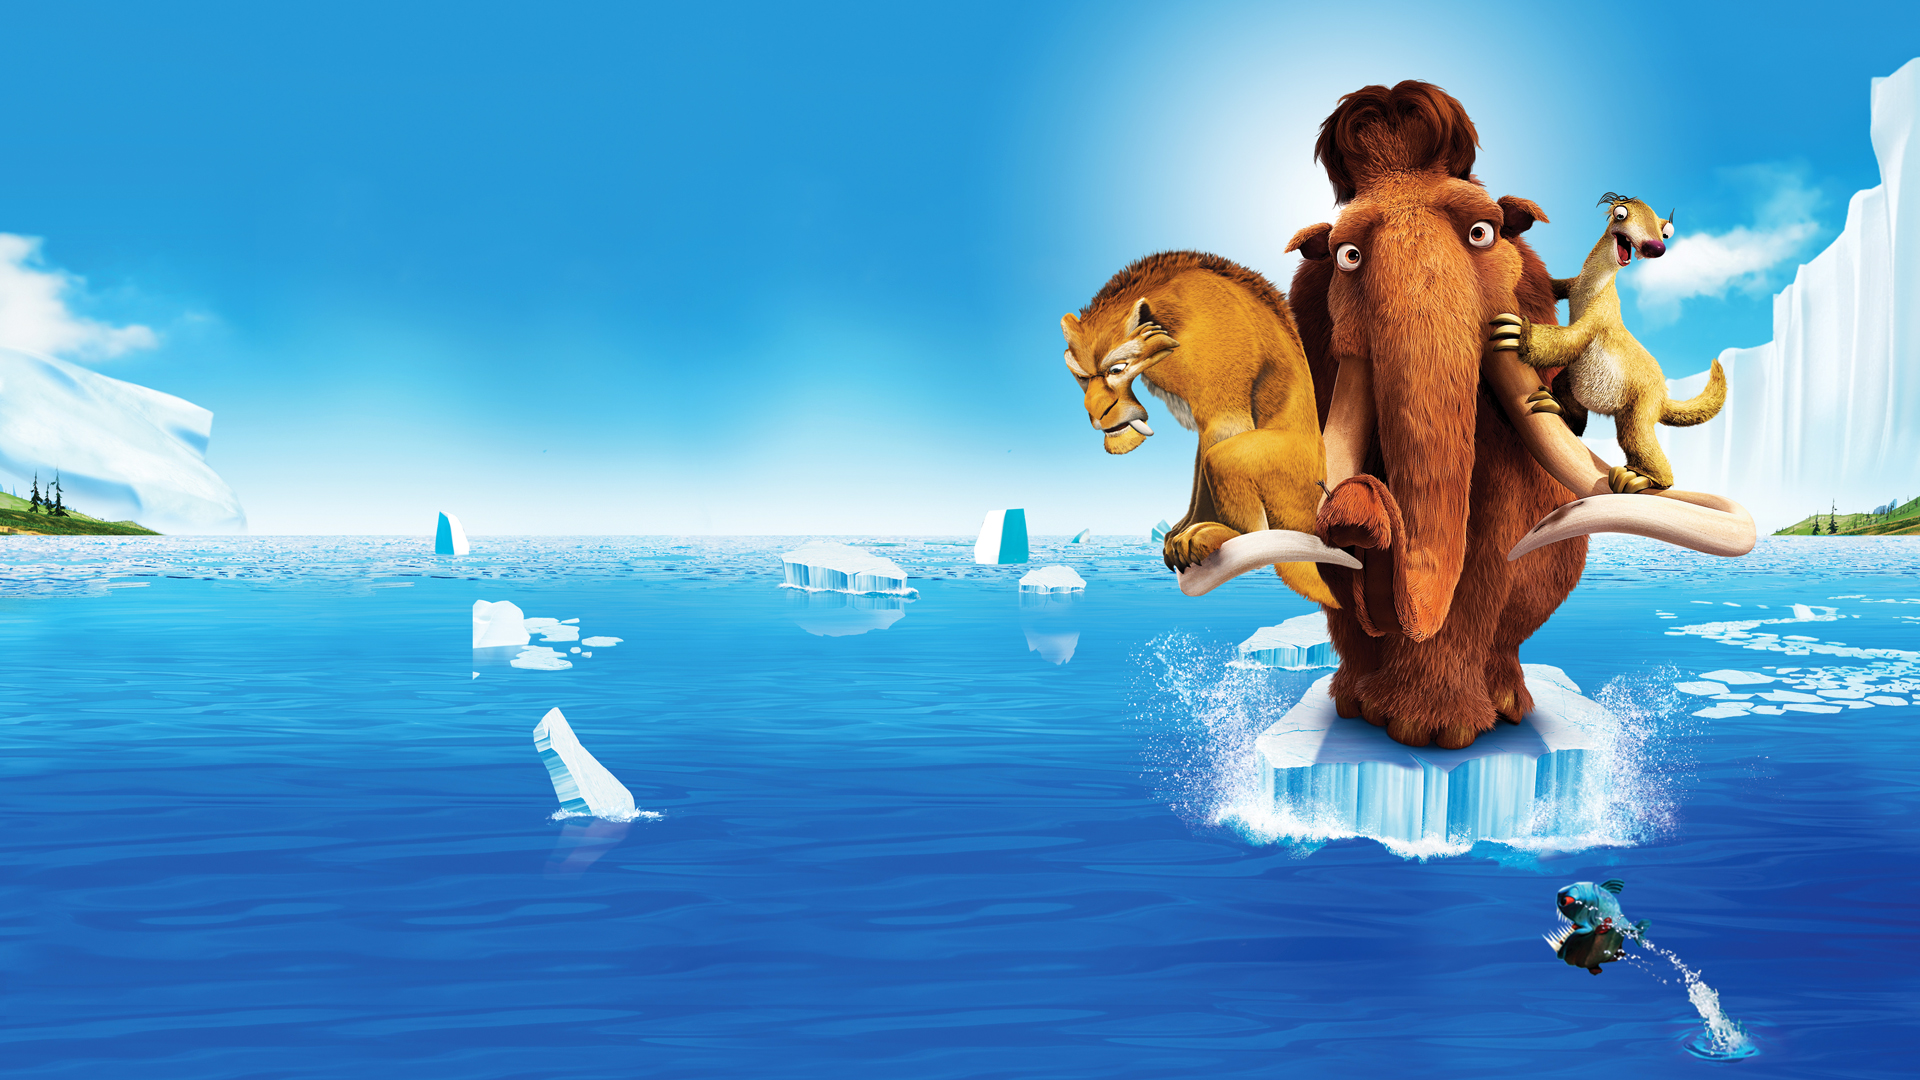 Ice Age HD Wallpaper Hebus Org High Definition